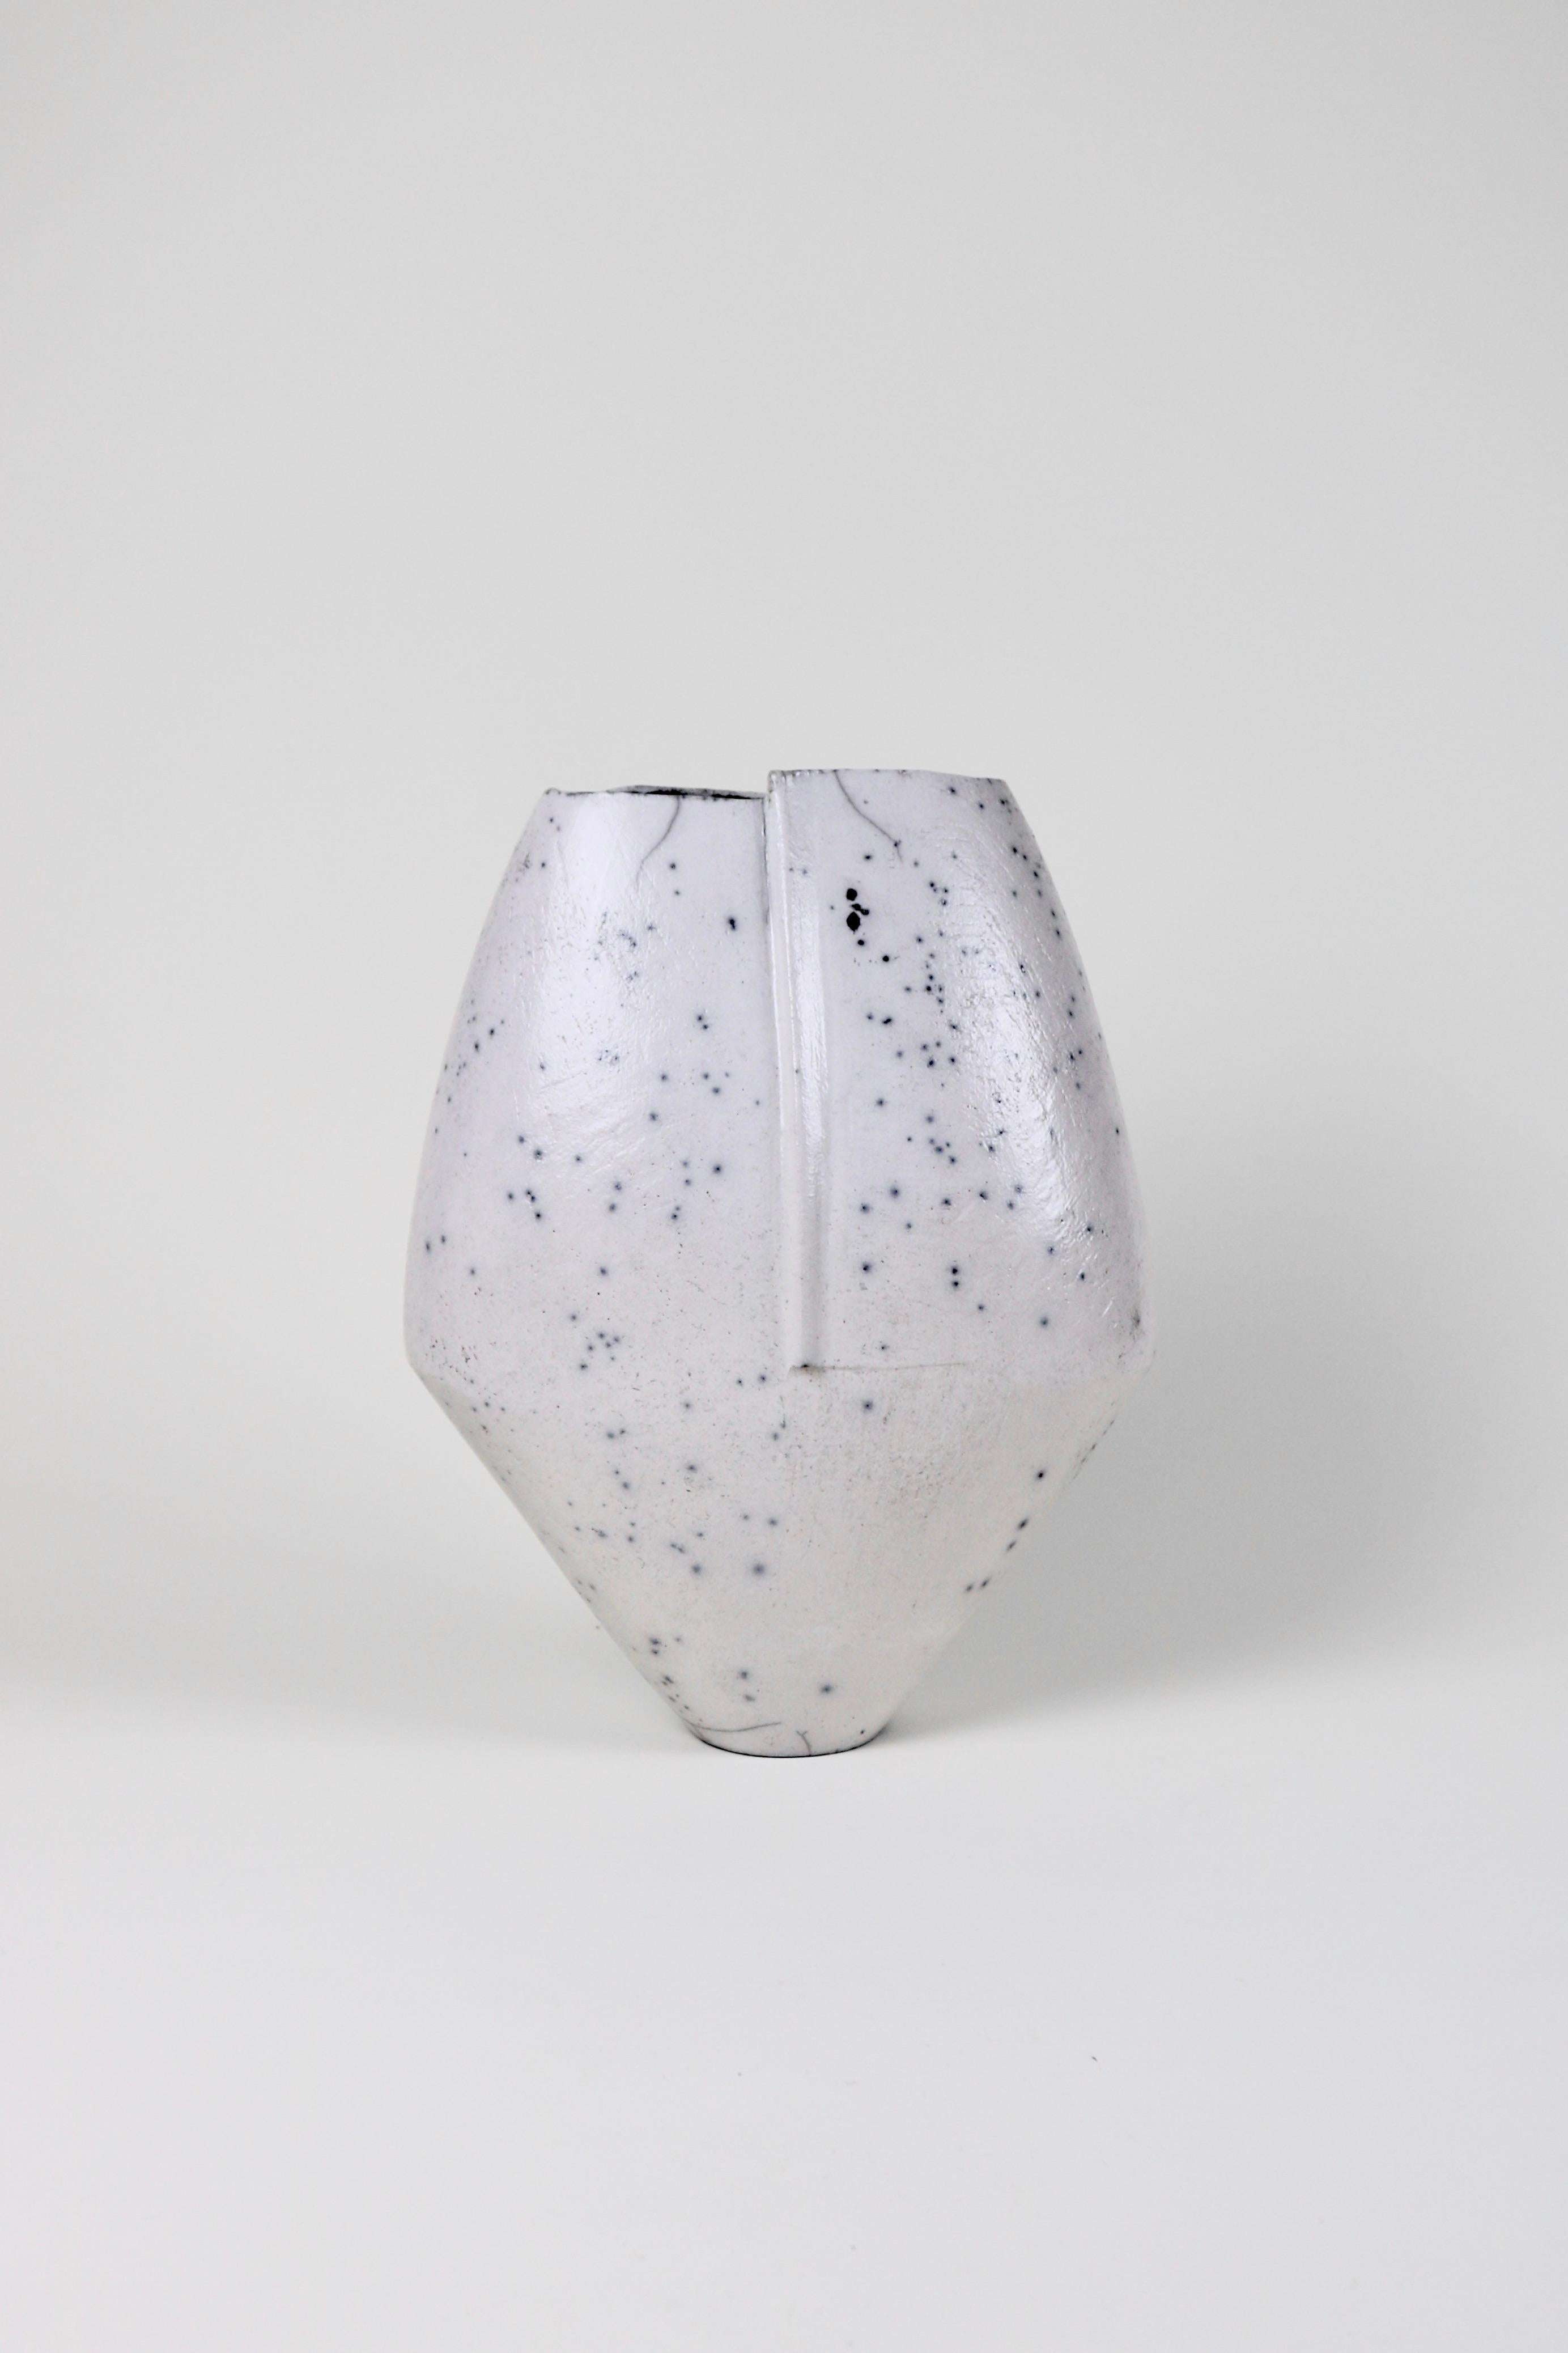 An impressive large-scale vase from Stephen Murfitt. The vase is handbuilt and raku-fired leaving delicate black markings throughout.

Measures: H 36cm
W 28cm
D 11cm.